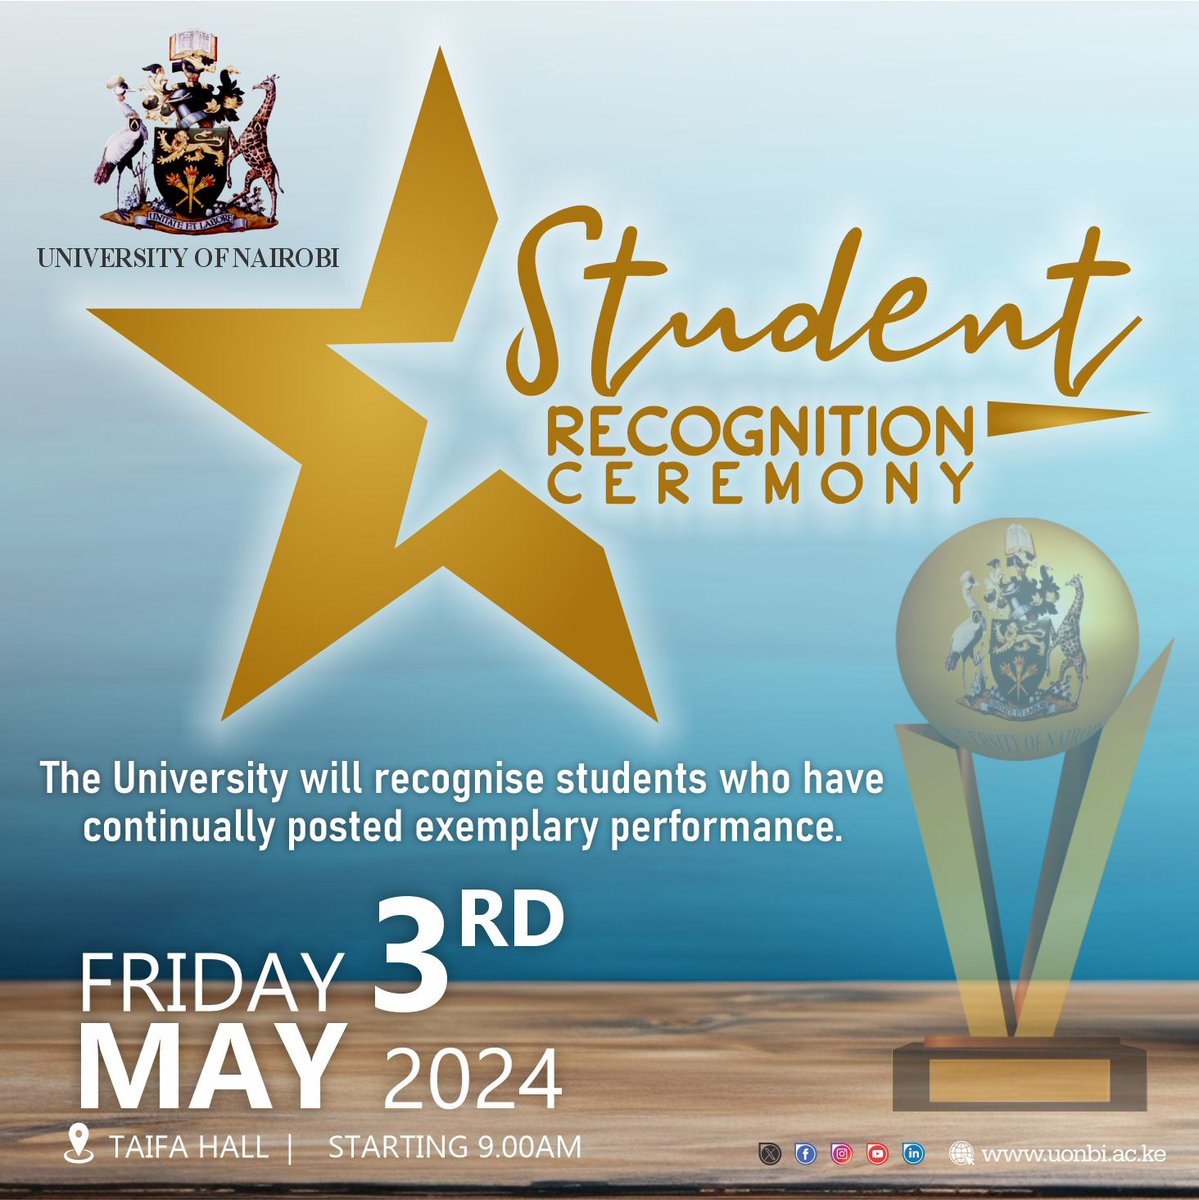 📺Stay Tuned!🔴
UNC TV will be covering live the Student Recognition Awards ceremony today at Taifa Hall; on Signet & YouTube. A total of 610 students will be recognised for their continued exemplary performance in various divisions @uonbi
#UoNStars #WeAreUoN #unctvke #uncradioke